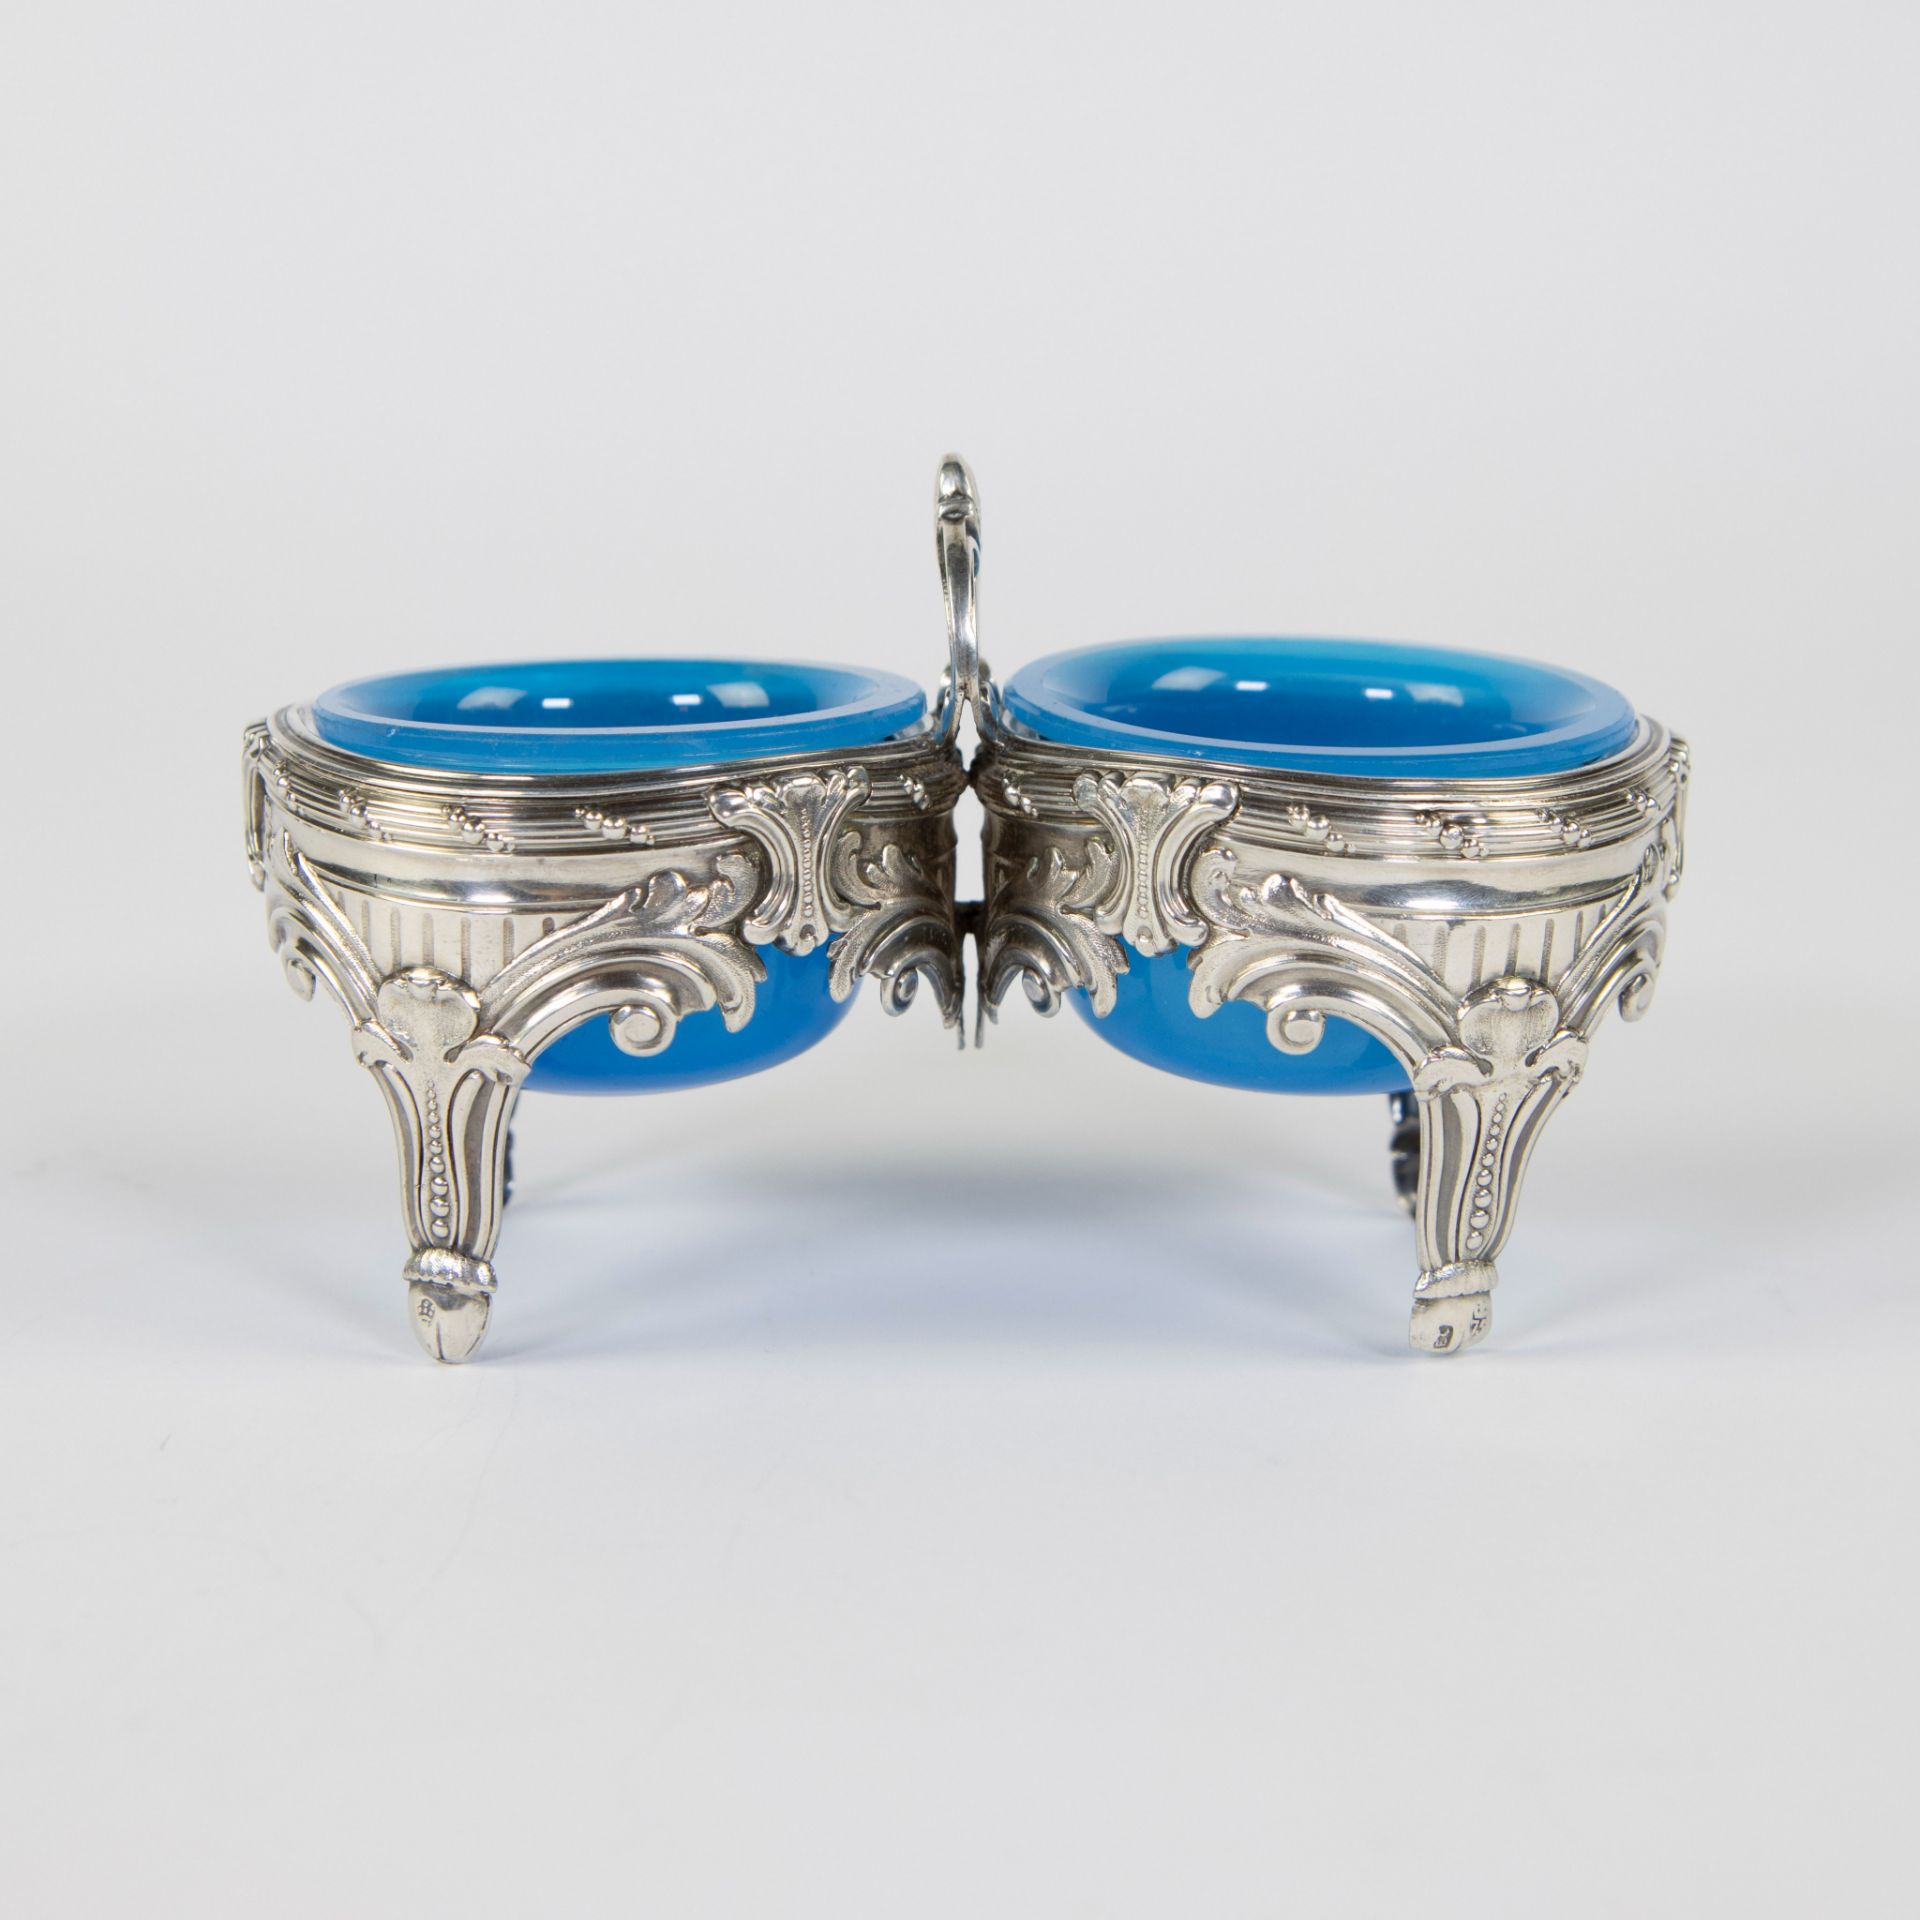 Silver salt cellar with light blue glass compartments, Mons, 18th century